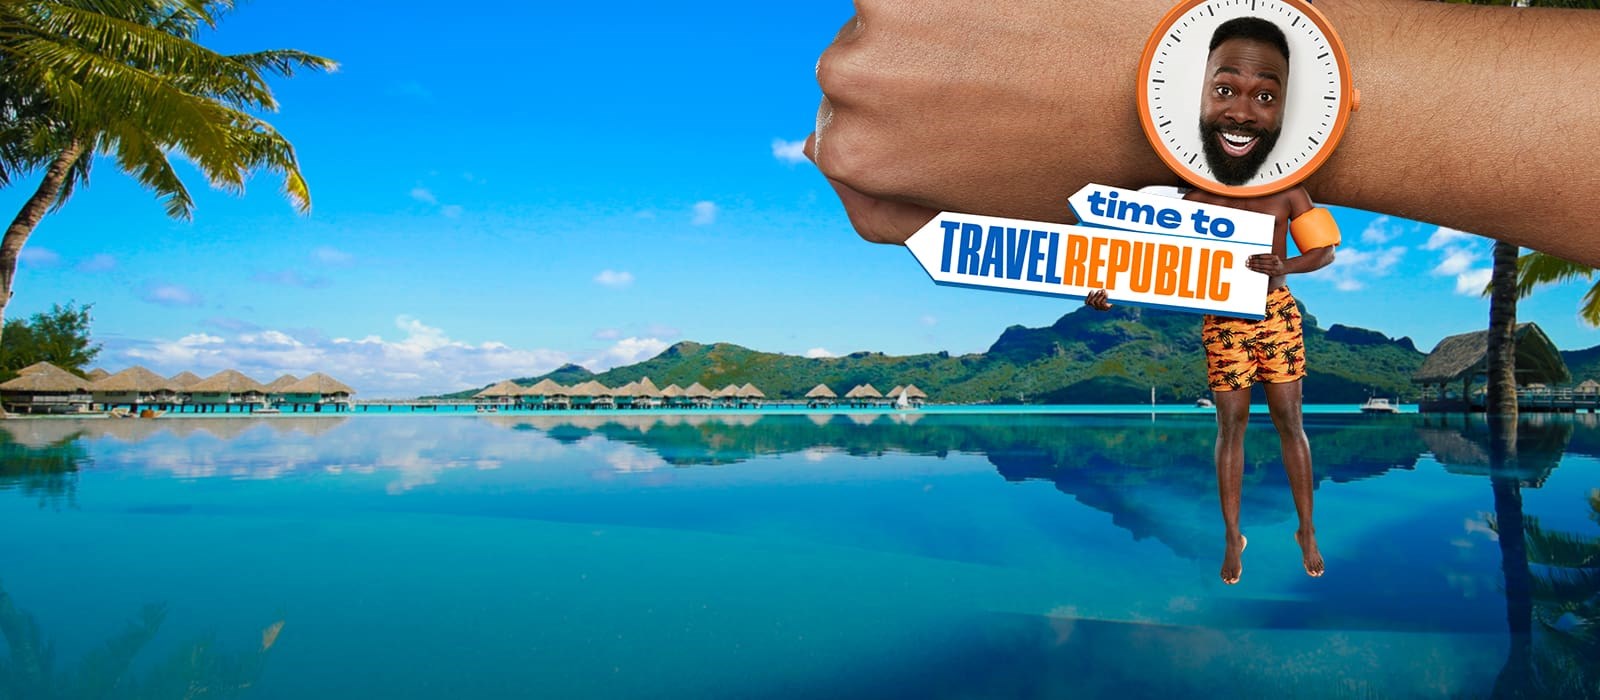 about travel republic